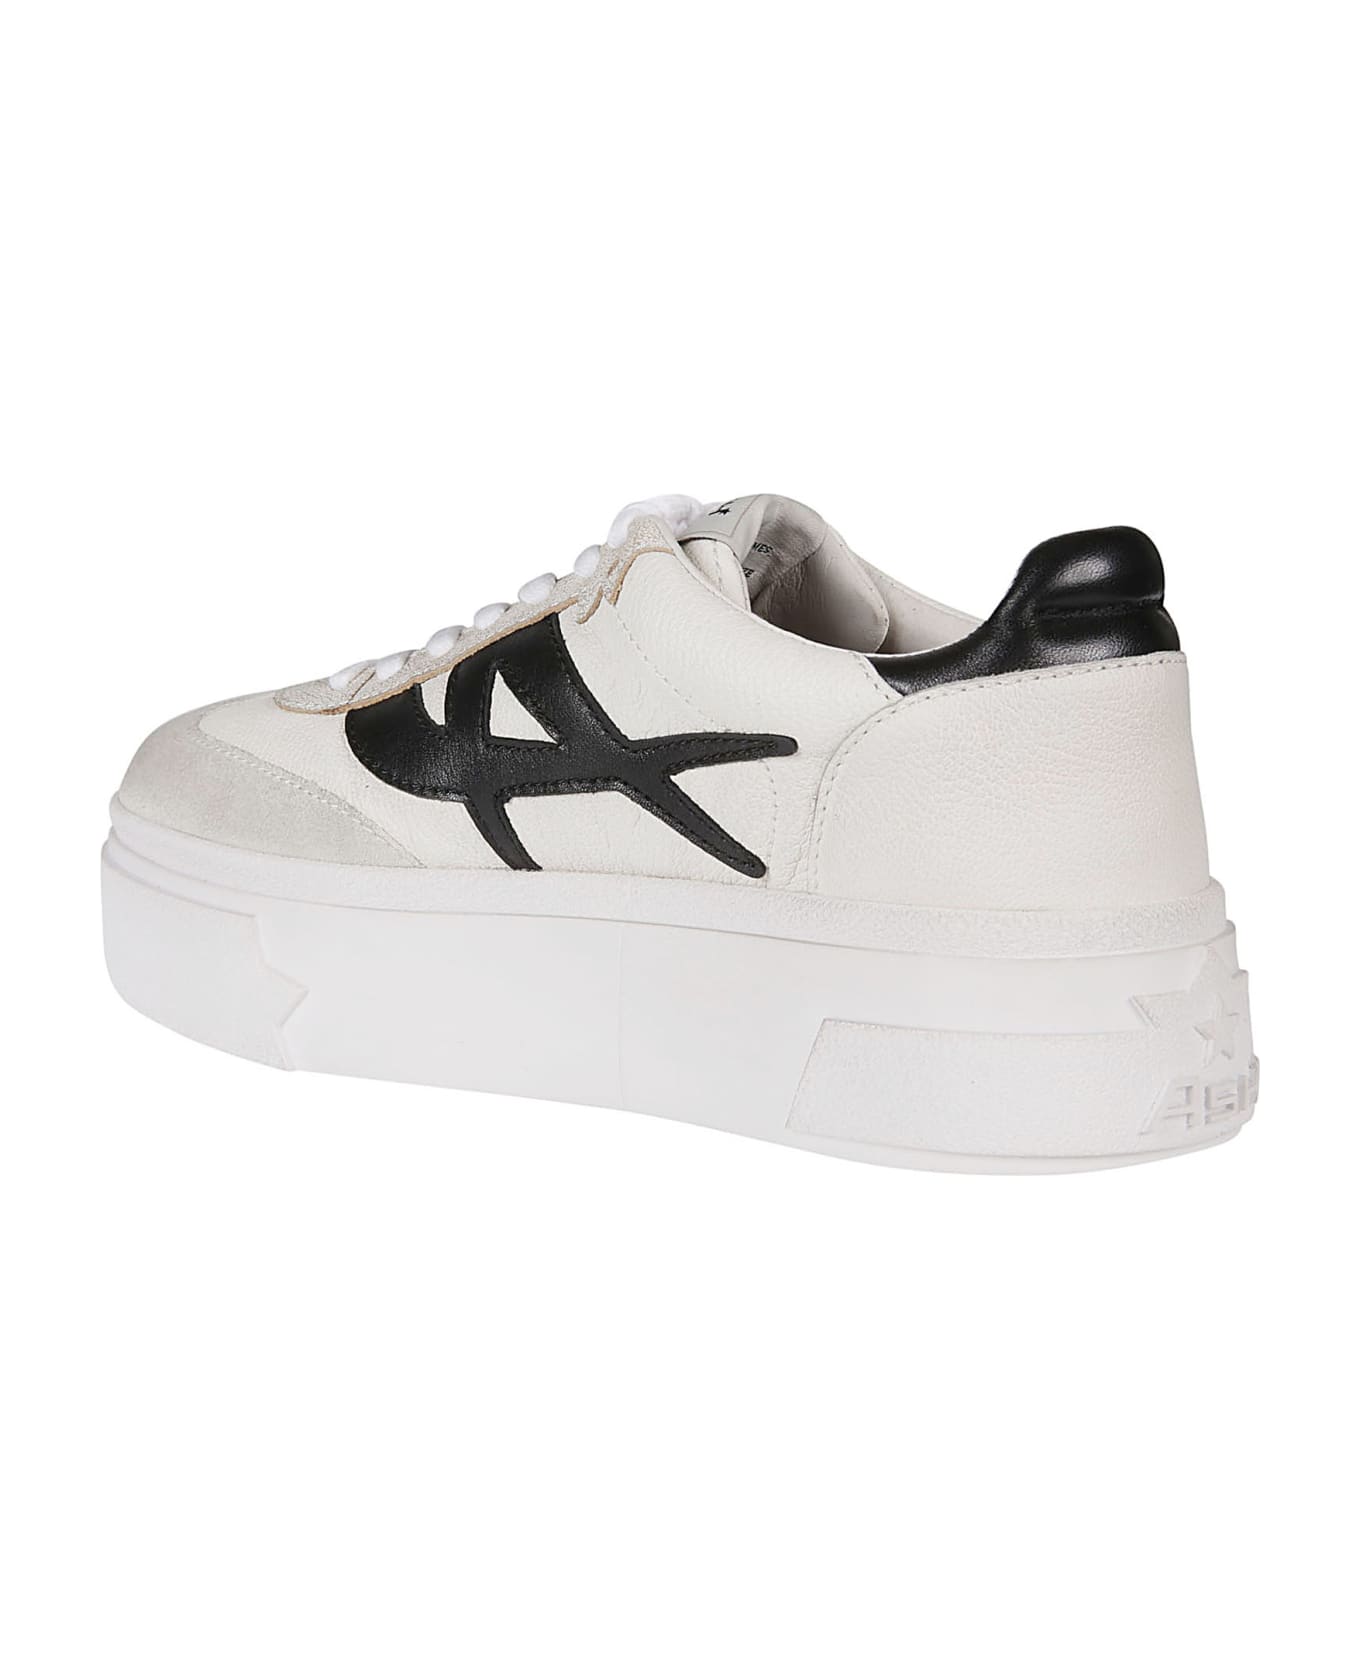 Ash Starmoon Sneakers - Off White/black スニーカー